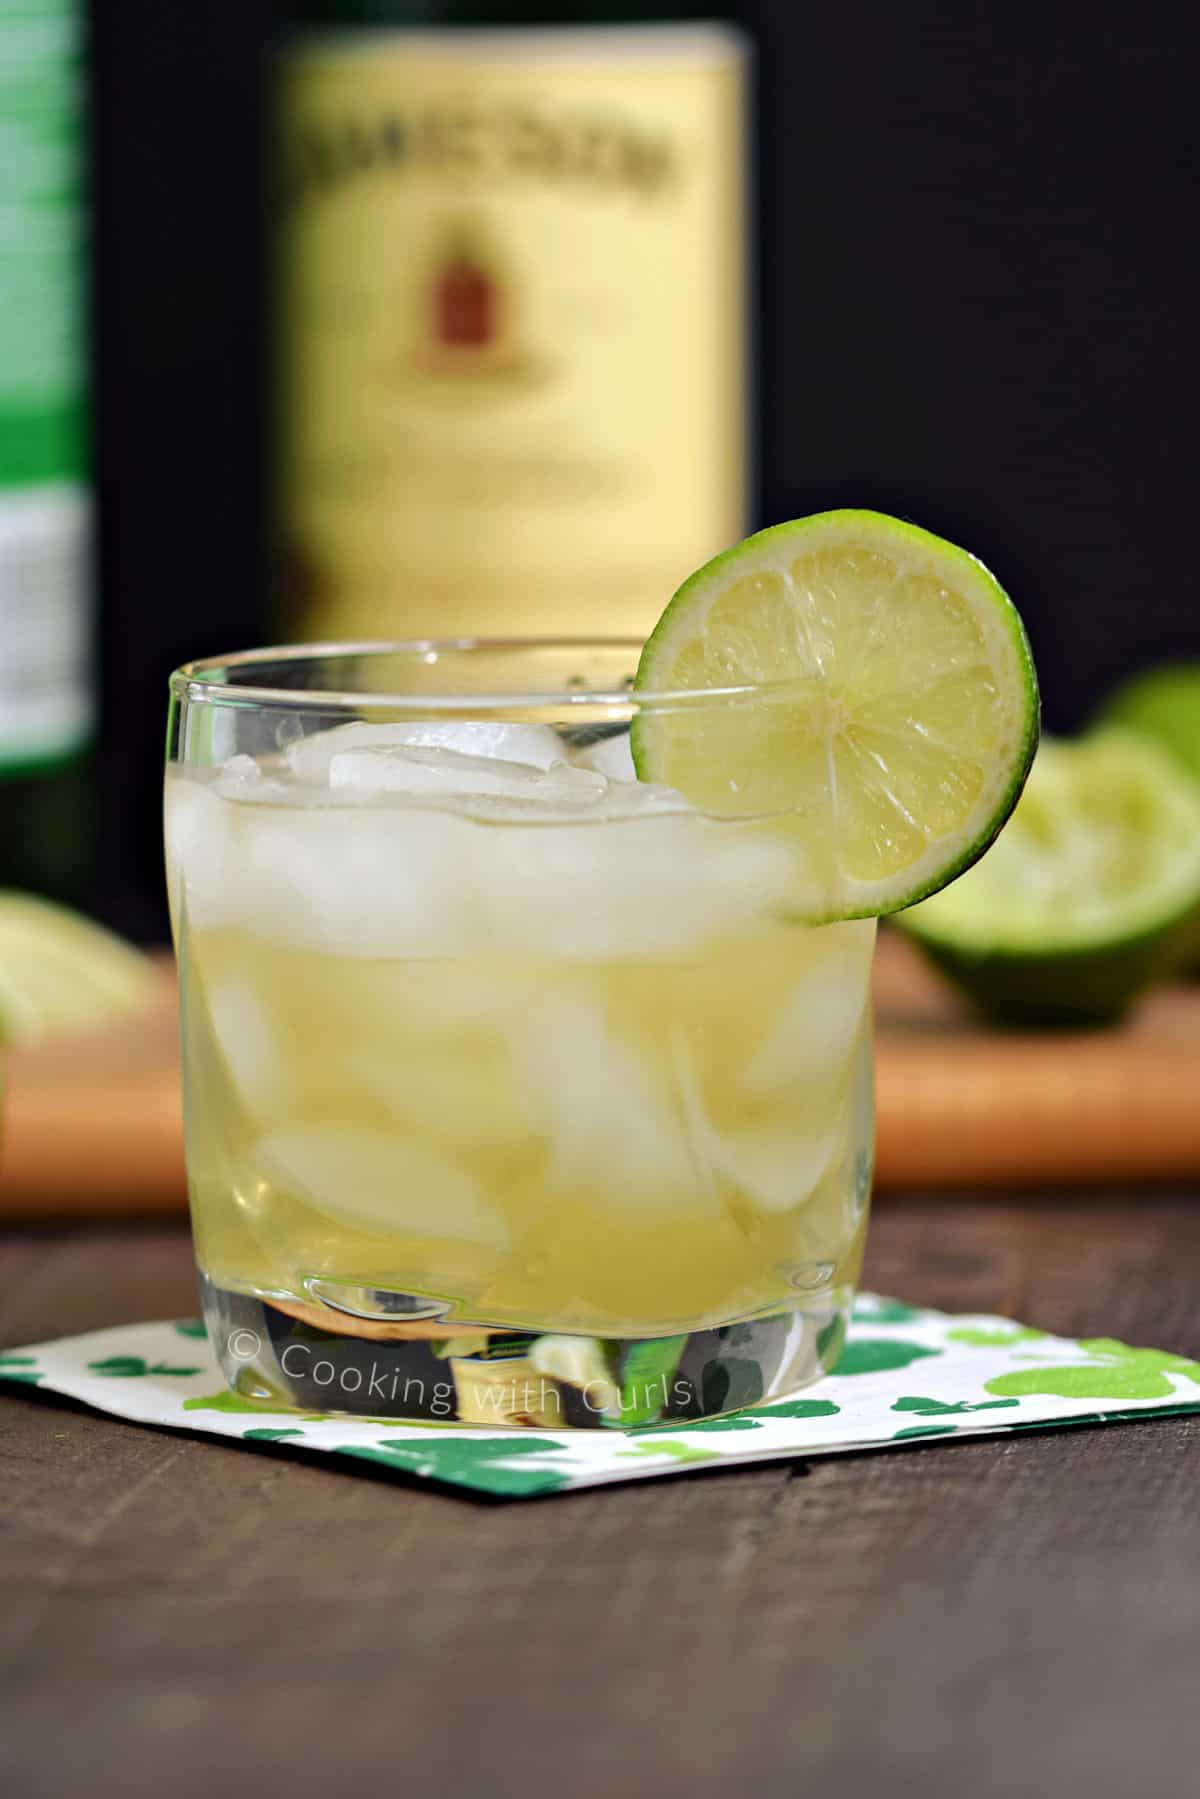 Jameson-ginger-and-lime-cocktail-in-an-ice-filled-glass.